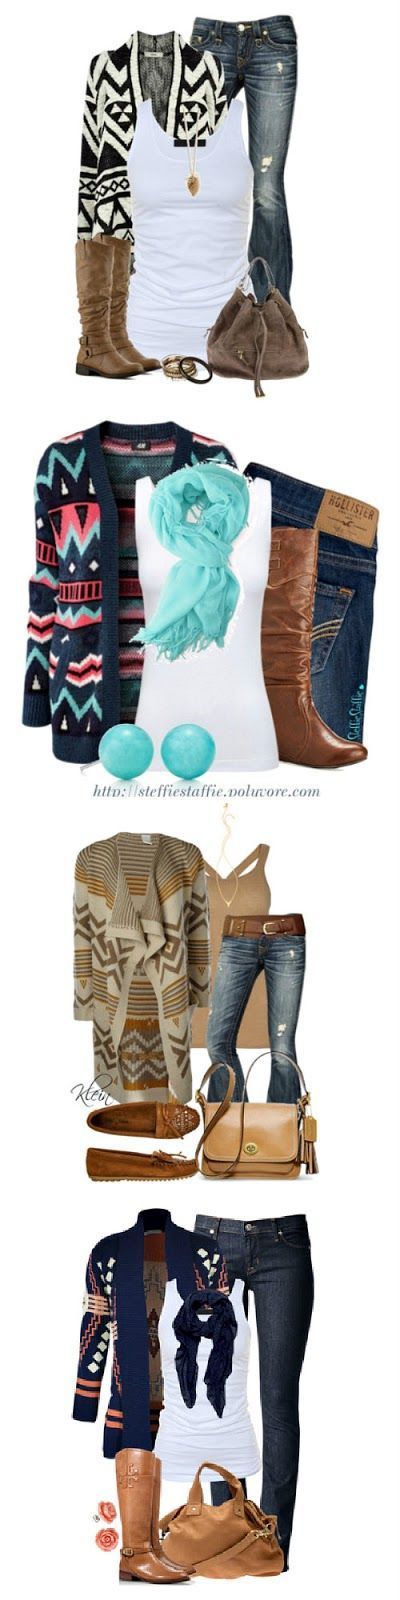 I would love a cardigan like one of these with all the color.. Not a fan of the black/white one but I like the others :).